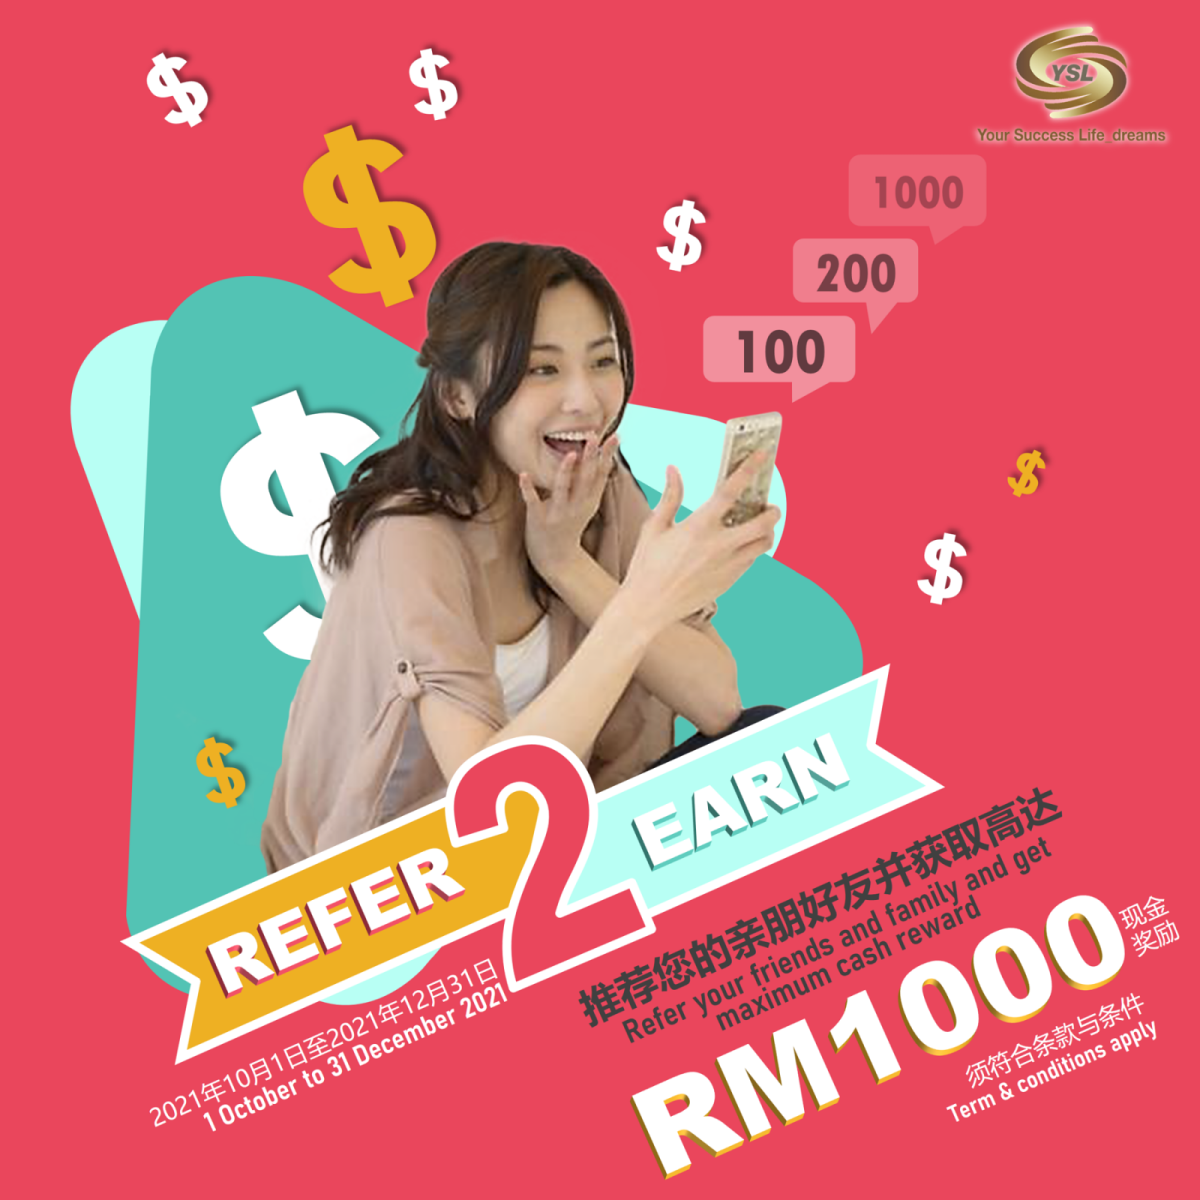 Refer2Earn - Refer your friends and family and get rewarded up to RM1,000 cash reward!